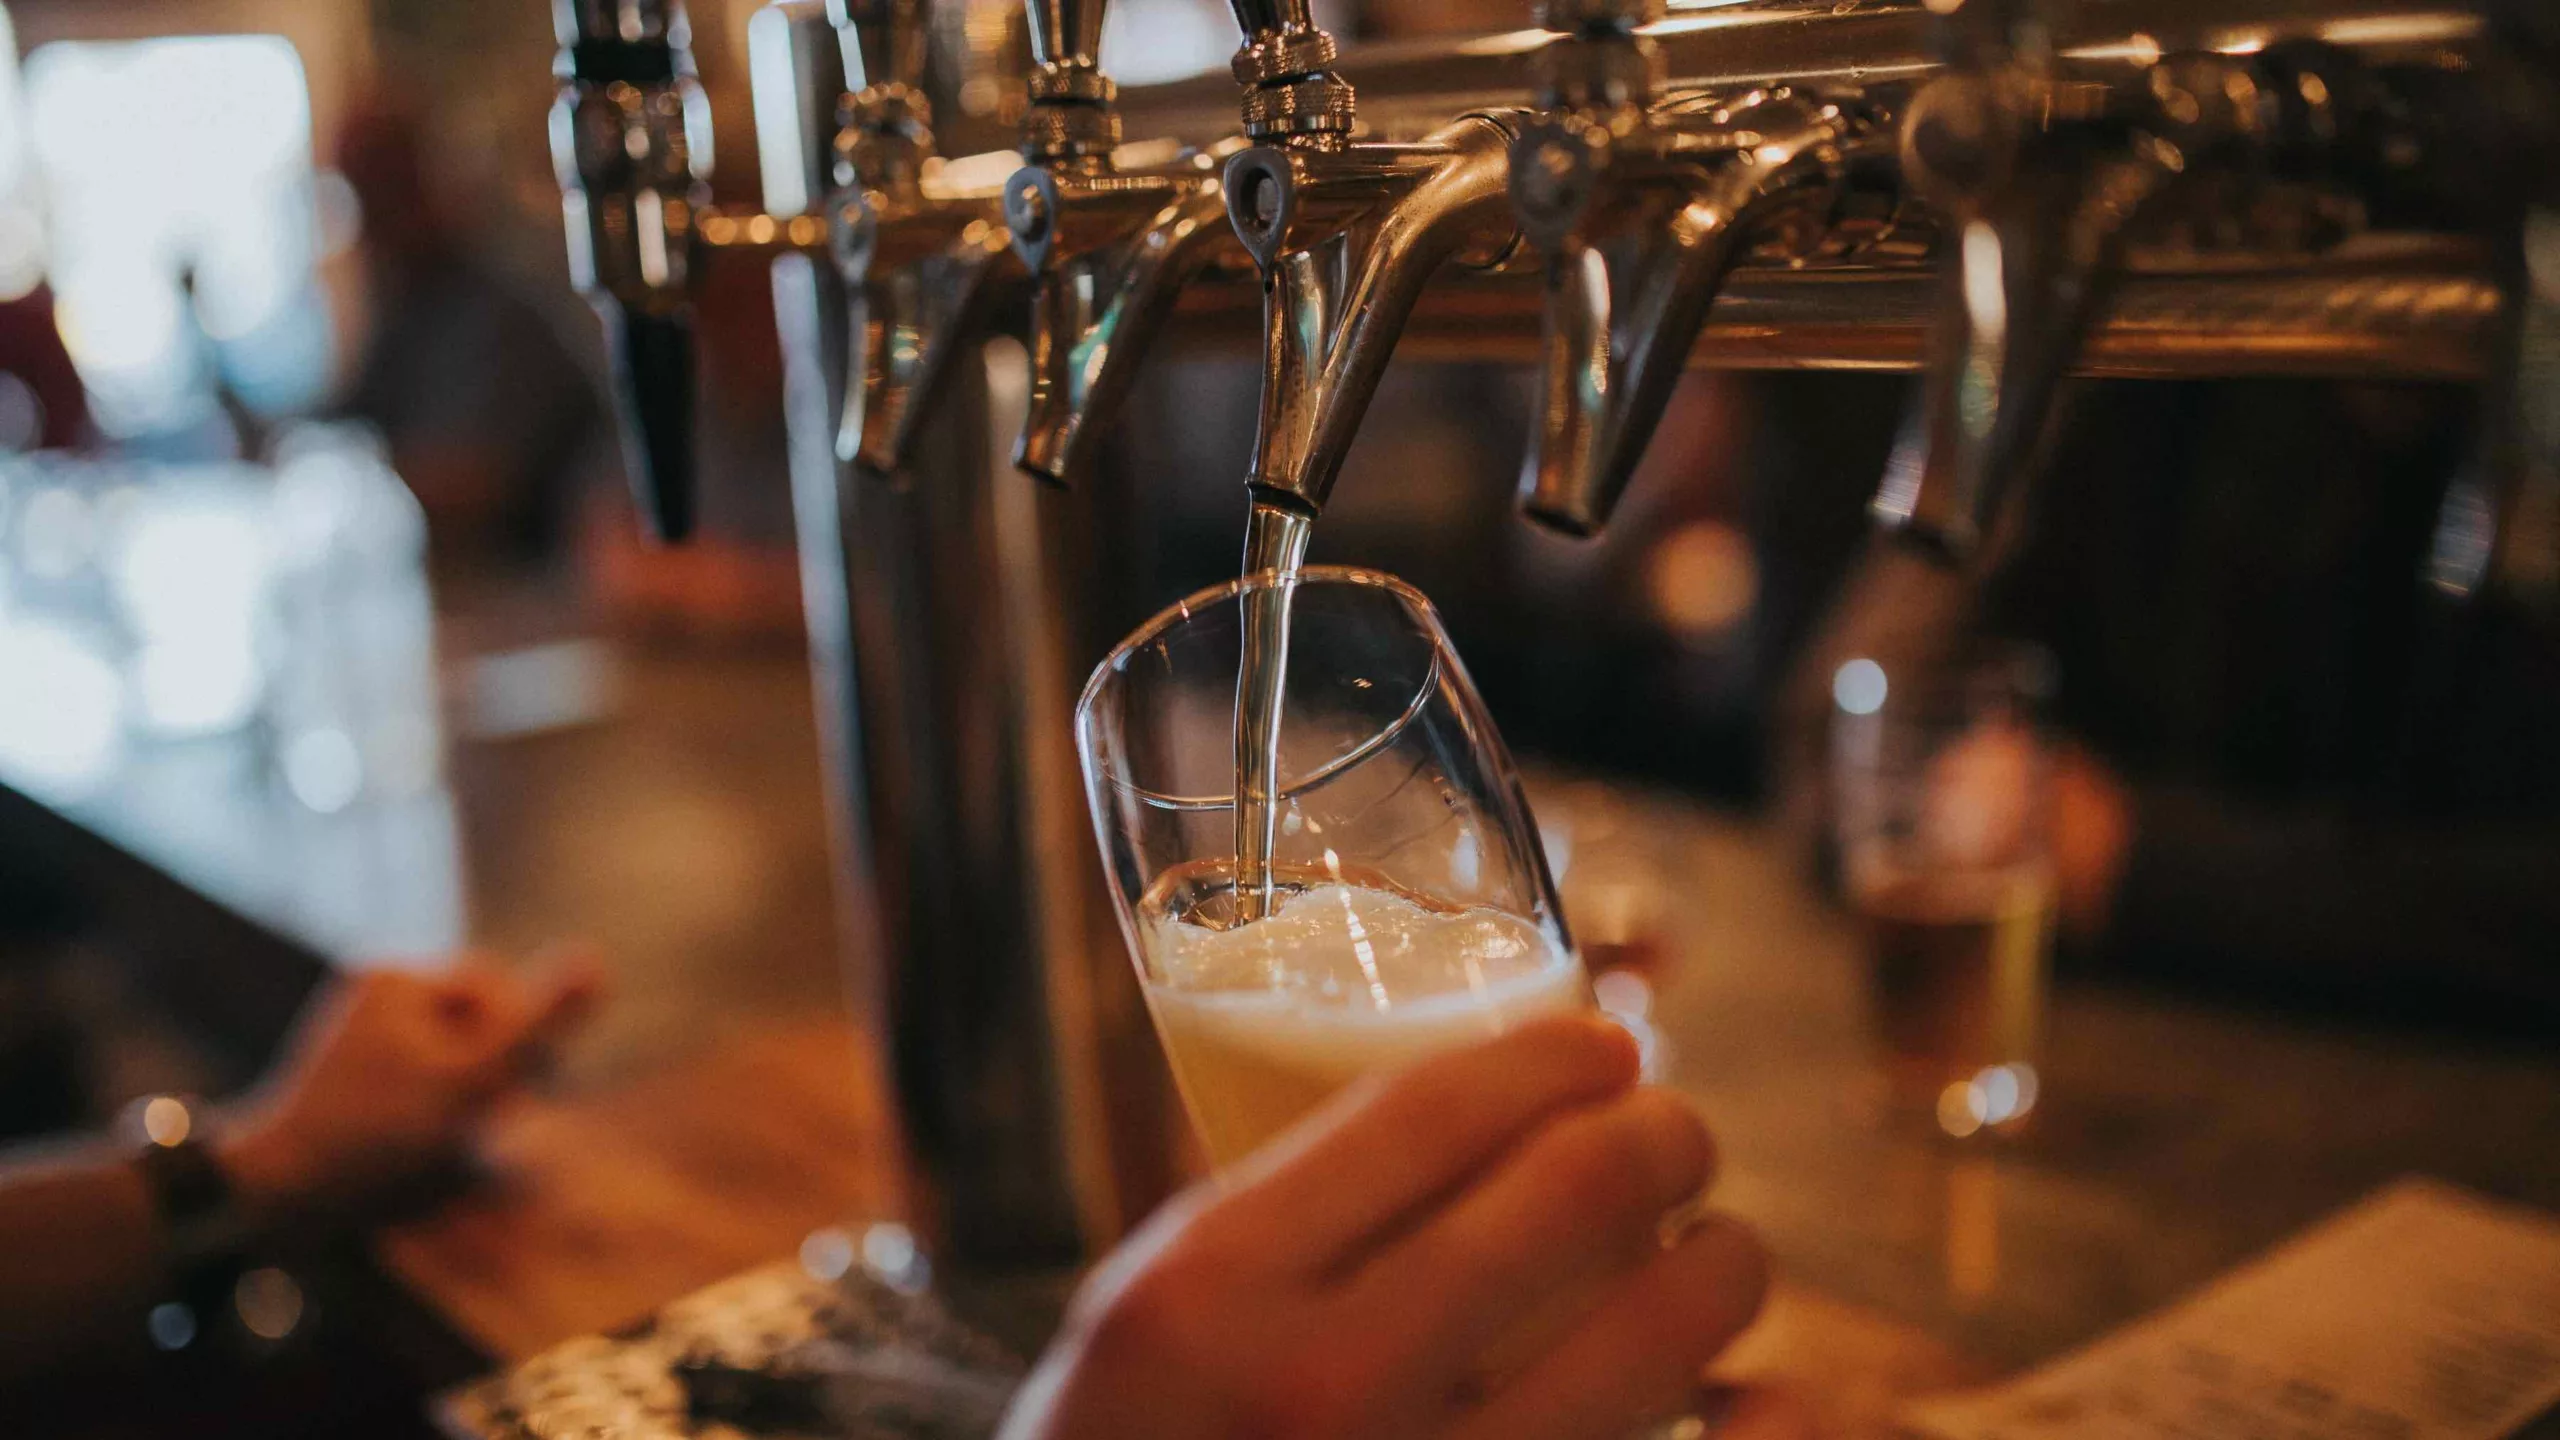 Beer being poured into a glass from the tap at a bar.